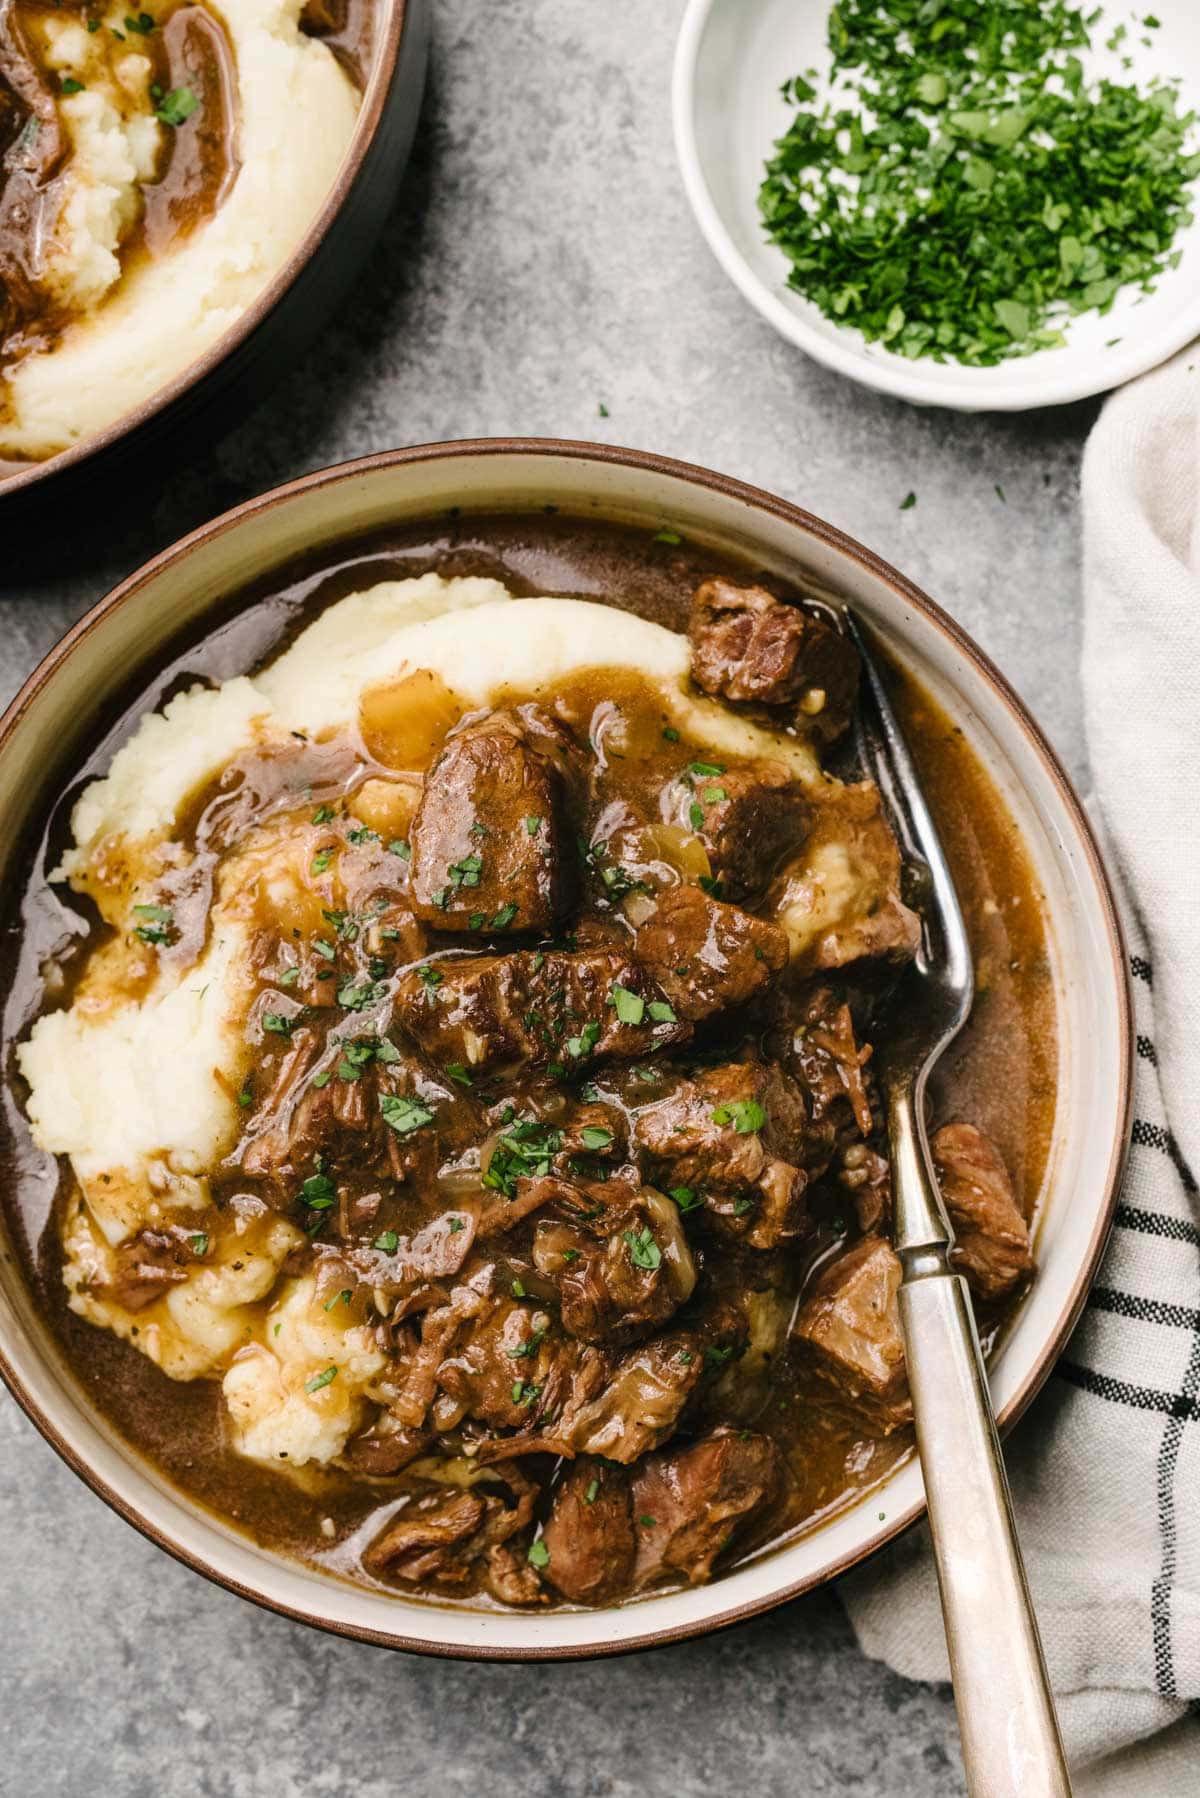 A fork tucked into Instant pot beef tips over mashed potatoes in a low serving bowl on a concrete background, surrounded by a striped linen napkin and small bowl of finely chopped parsley.